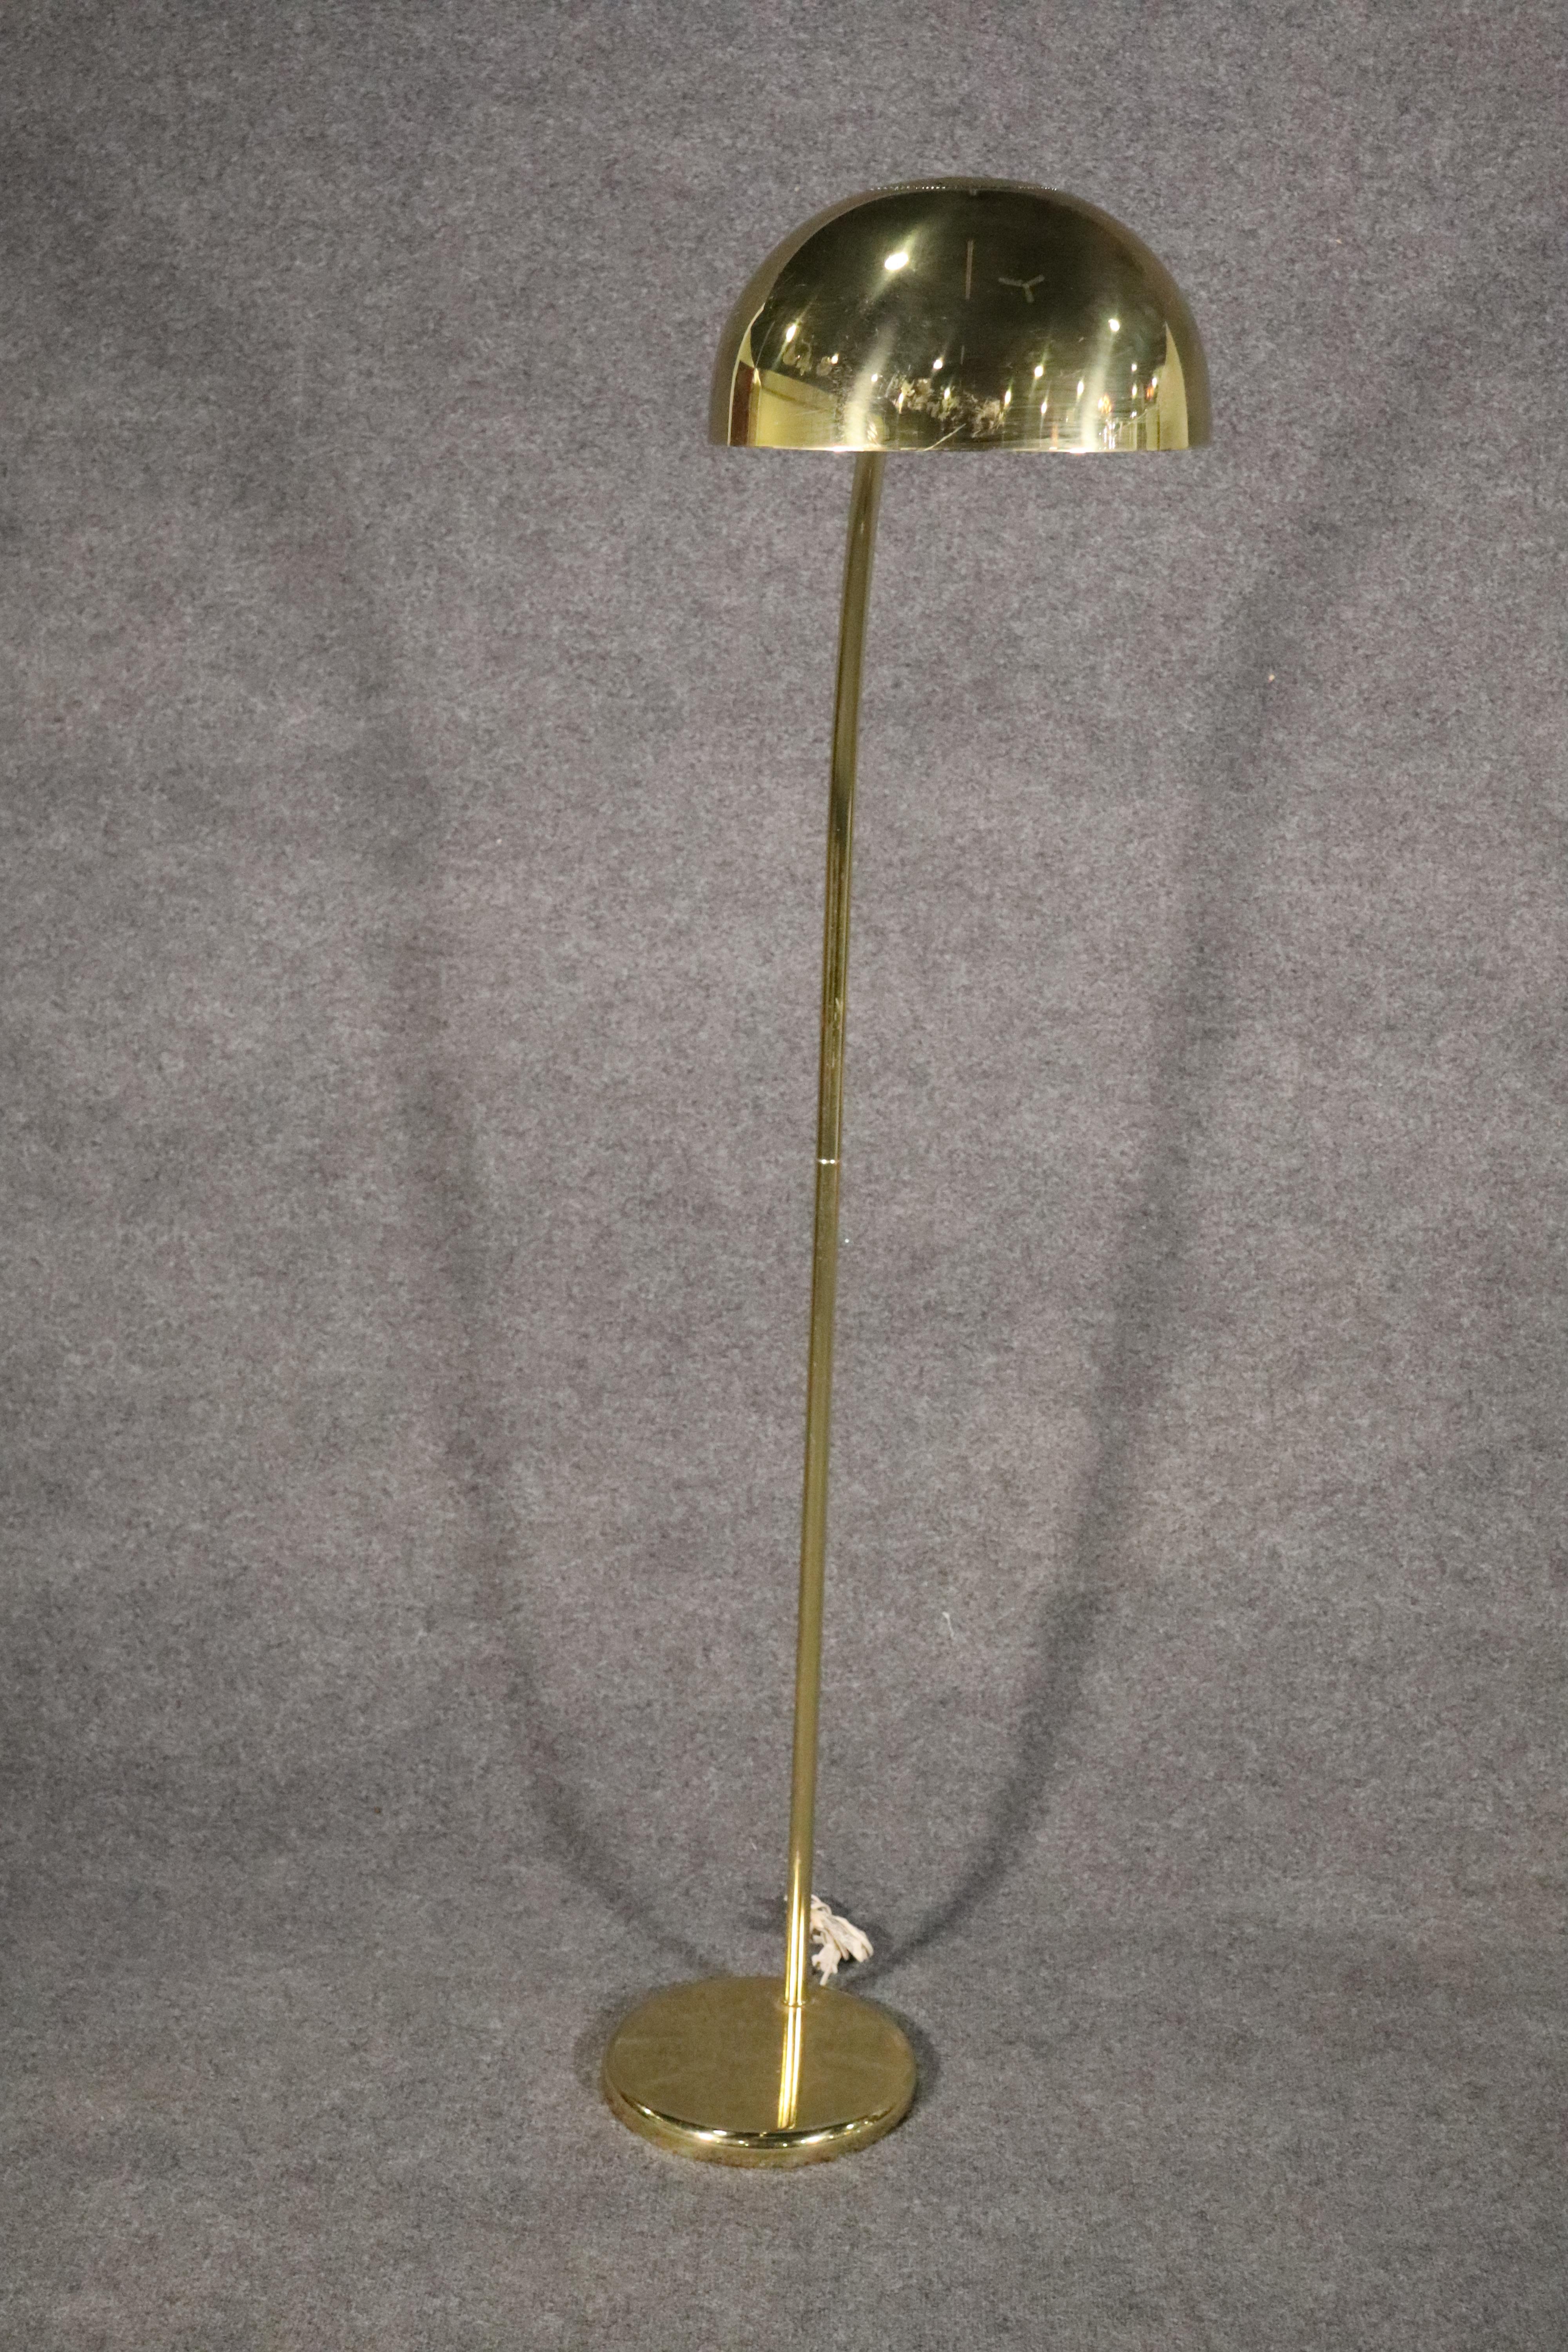 Vintage modern arch lamp in brass with polished finish. 
Please confirm location.